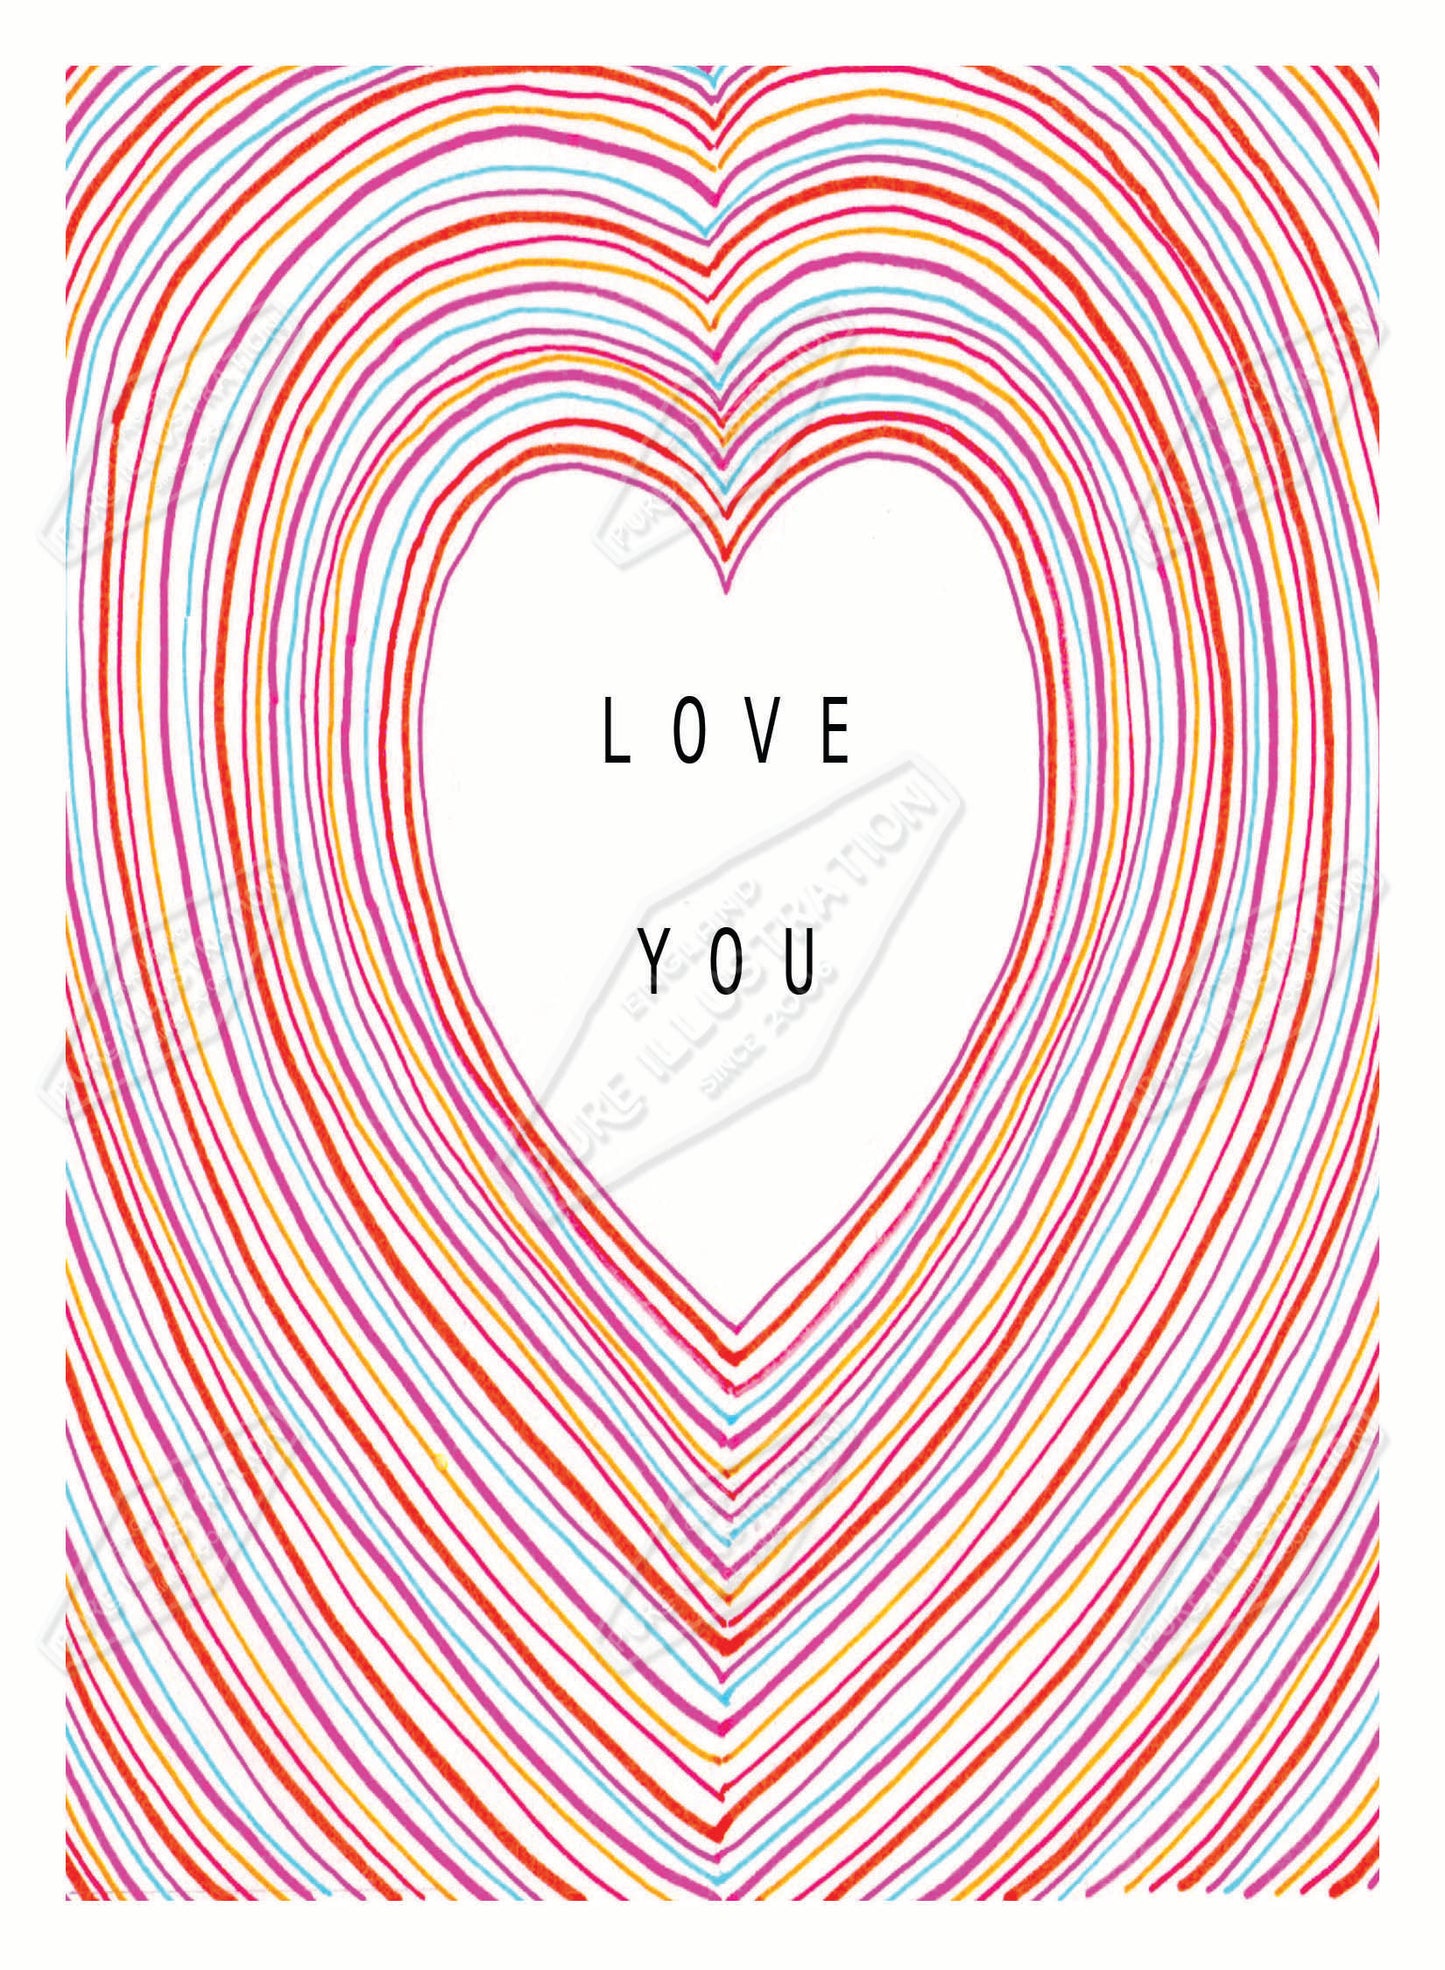 00035778AMA - Ally Marie is represented by Pure Art Licensing Agency - Valentine's Day Greeting Card Design